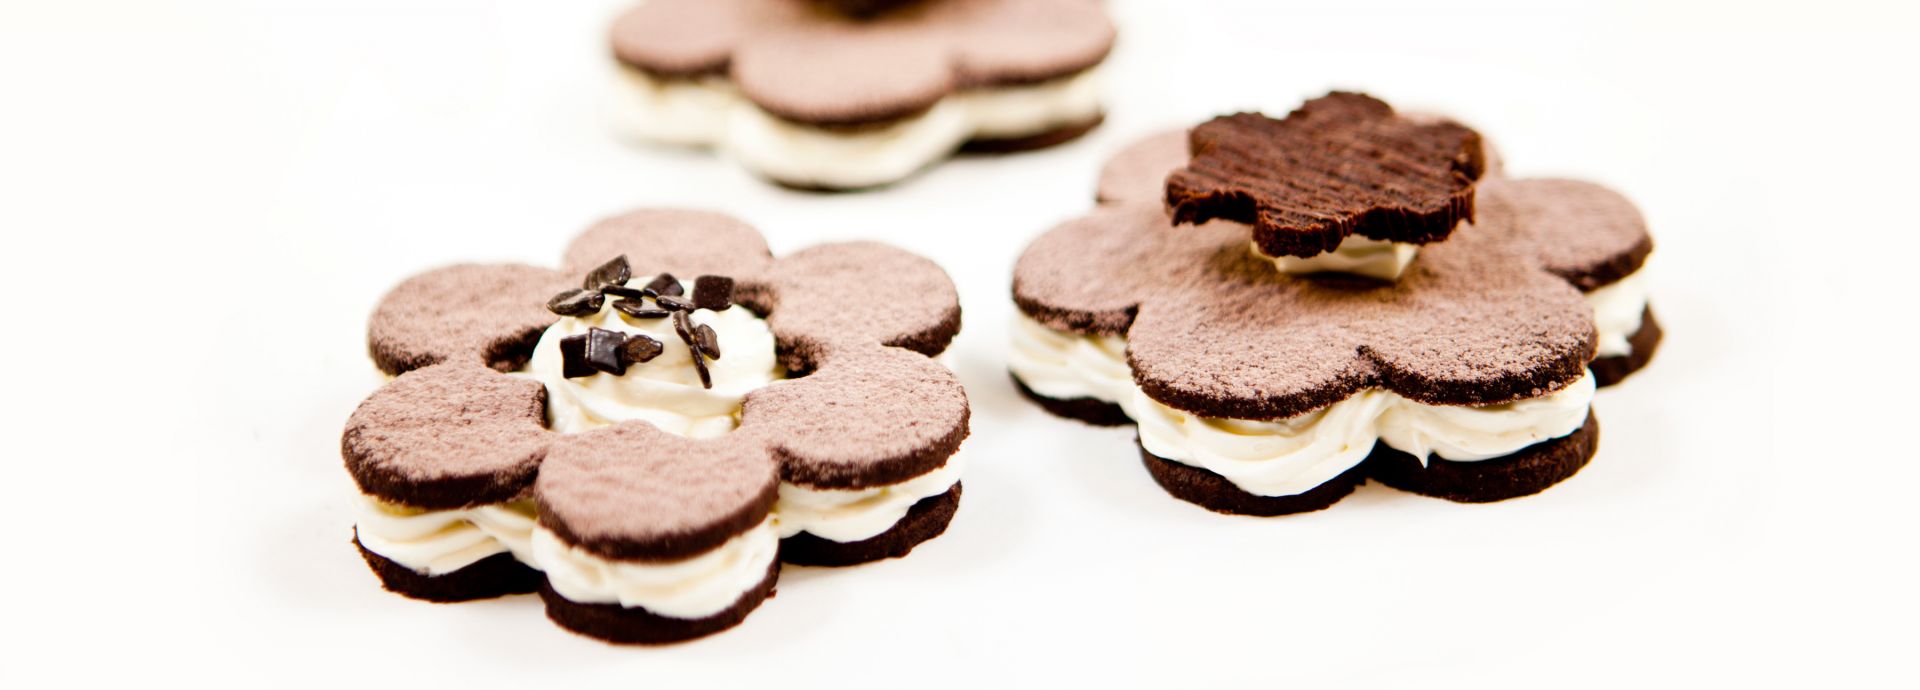 Chocolate flower biscuits